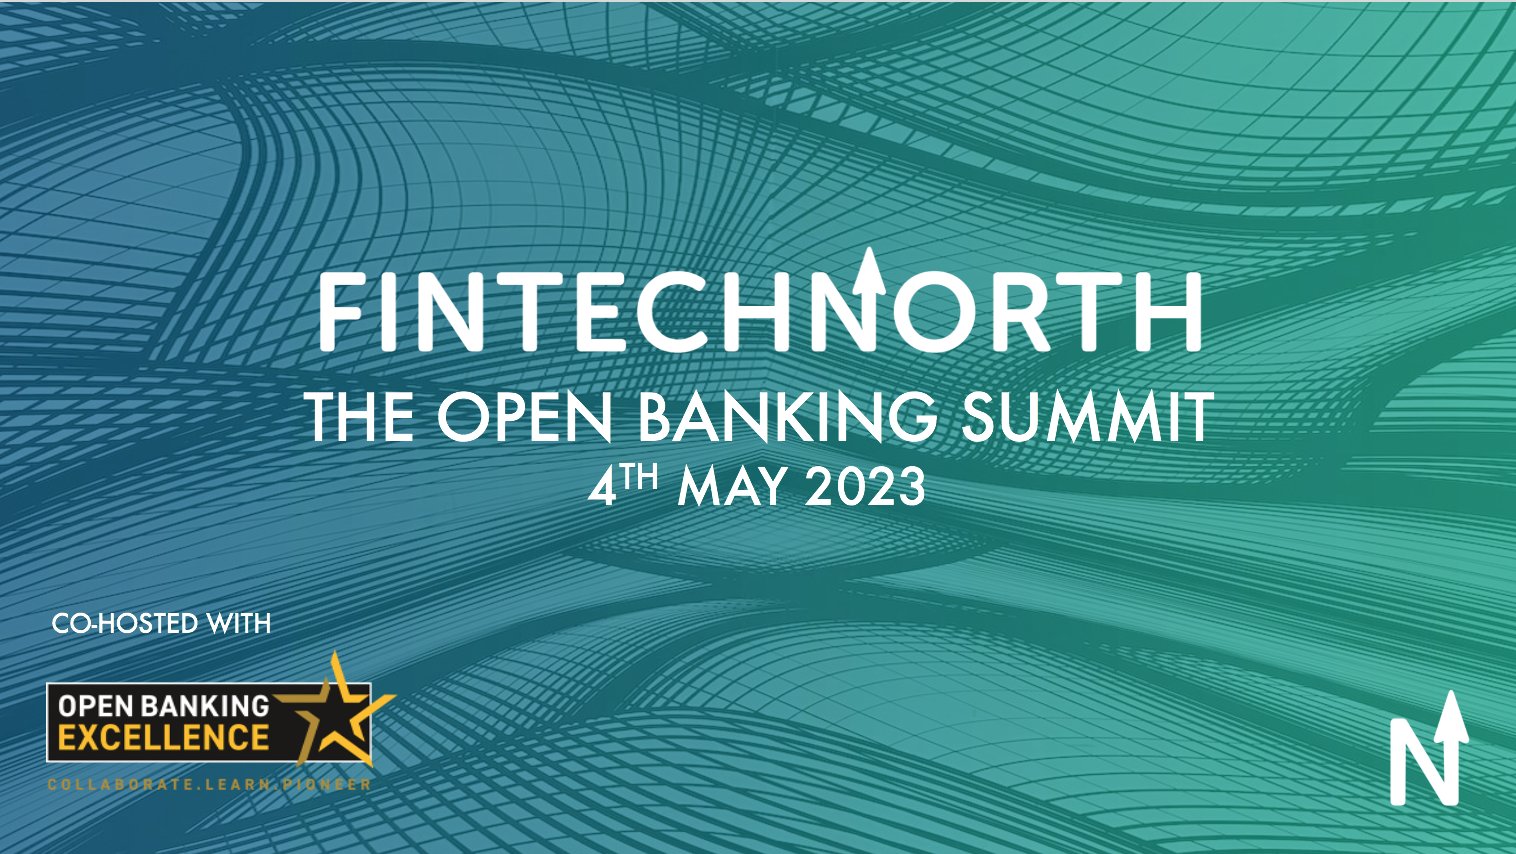 The Open Banking Summit